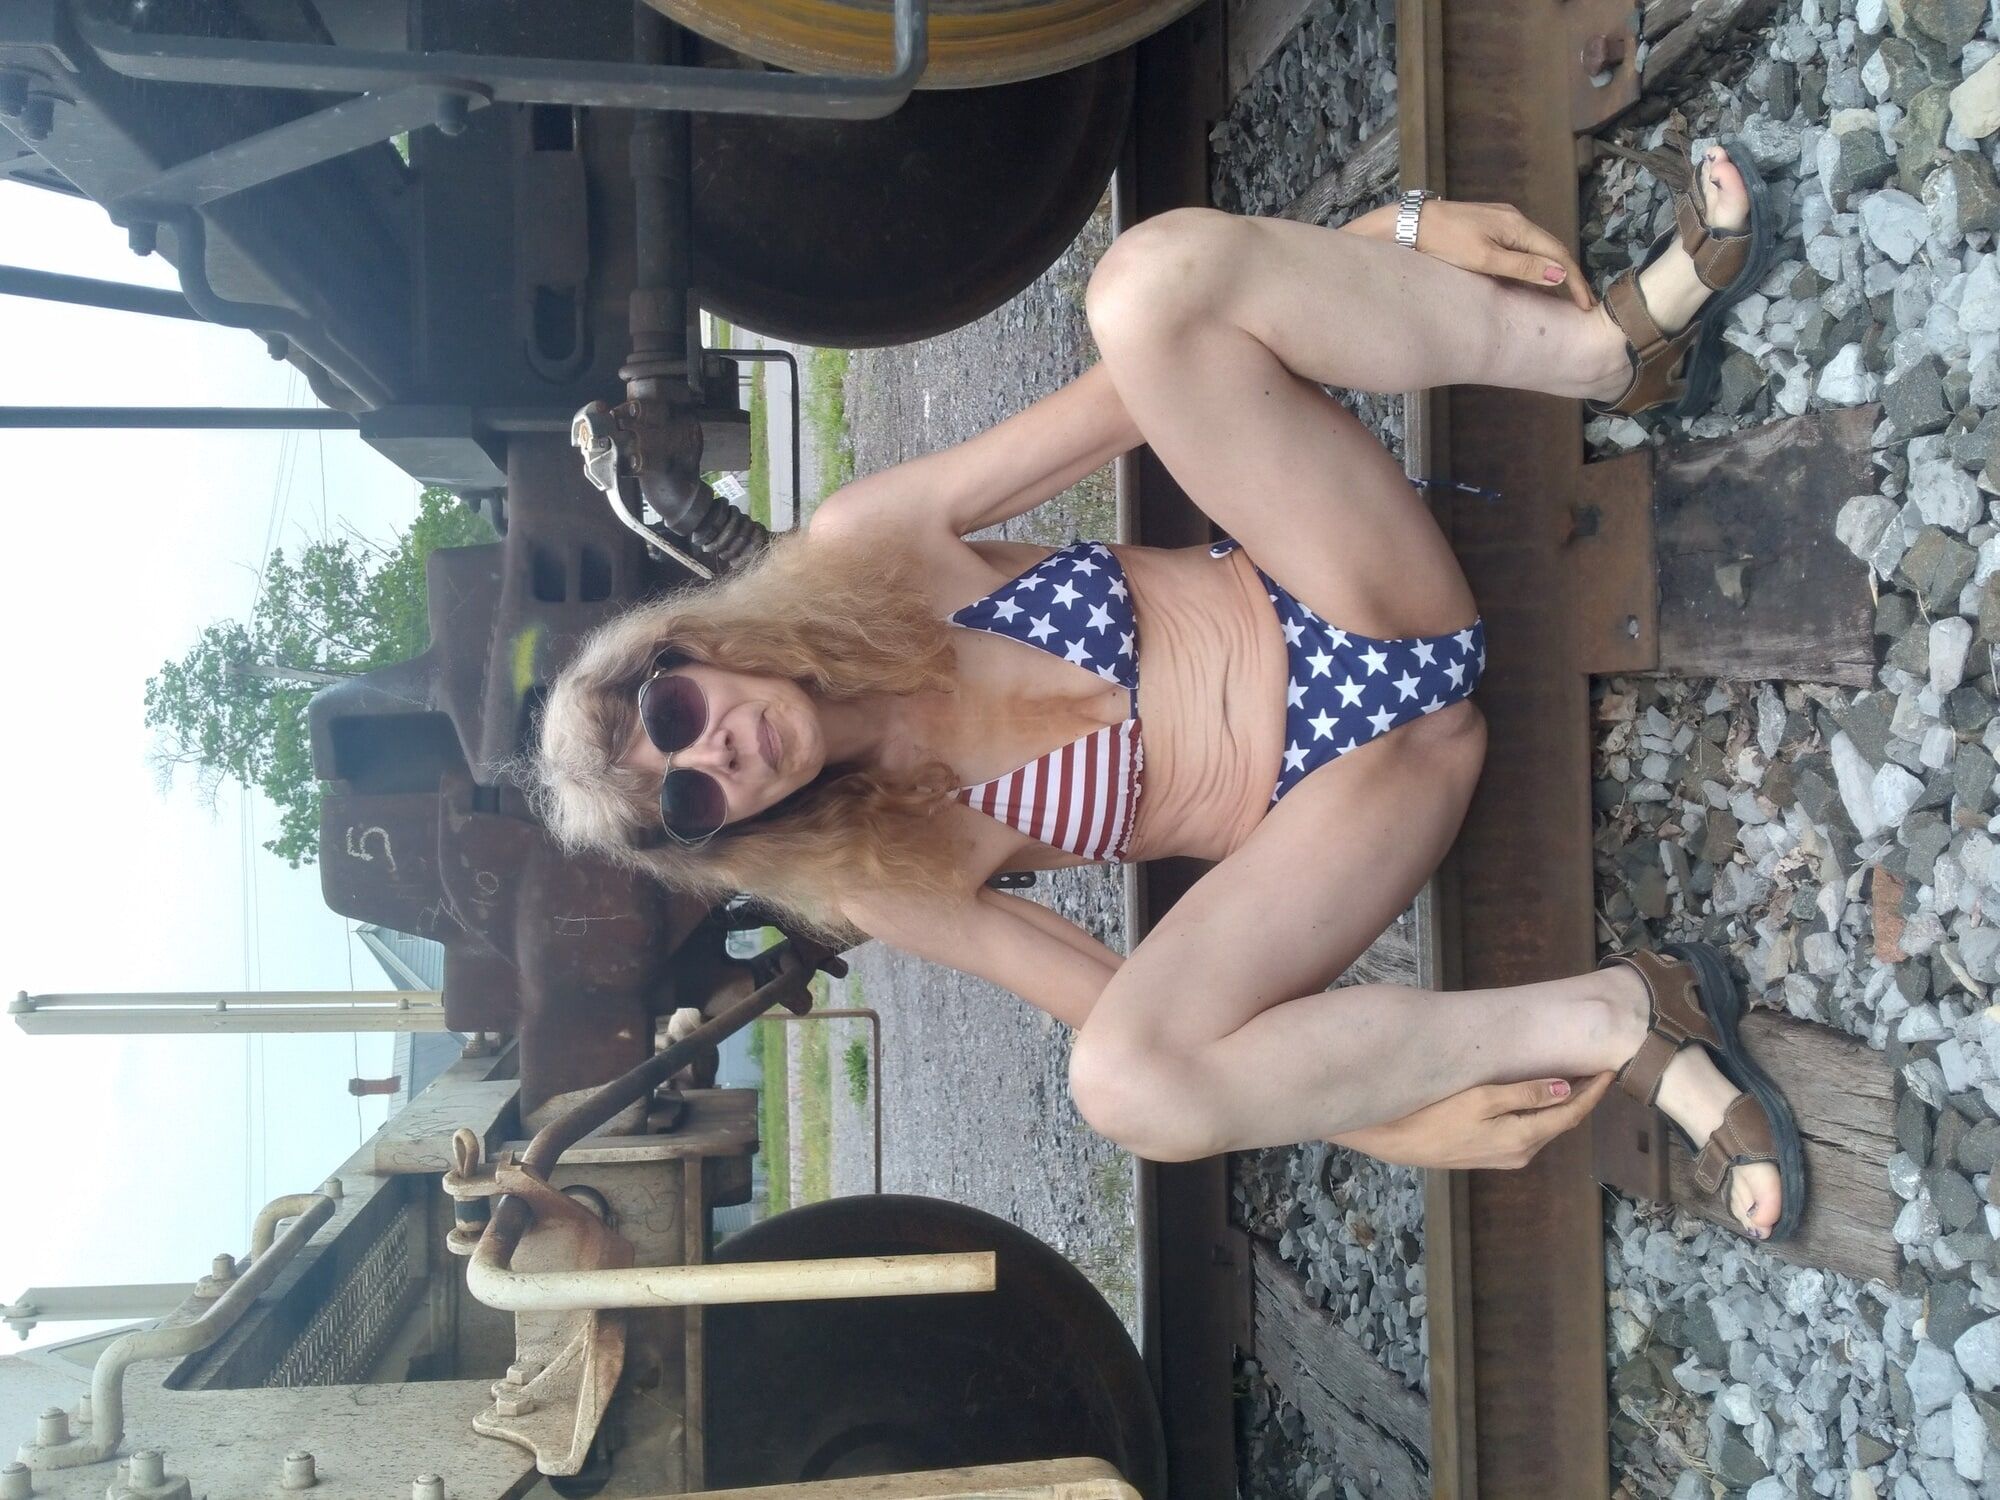 American Train. July 4th release. My best photo set to date. #11